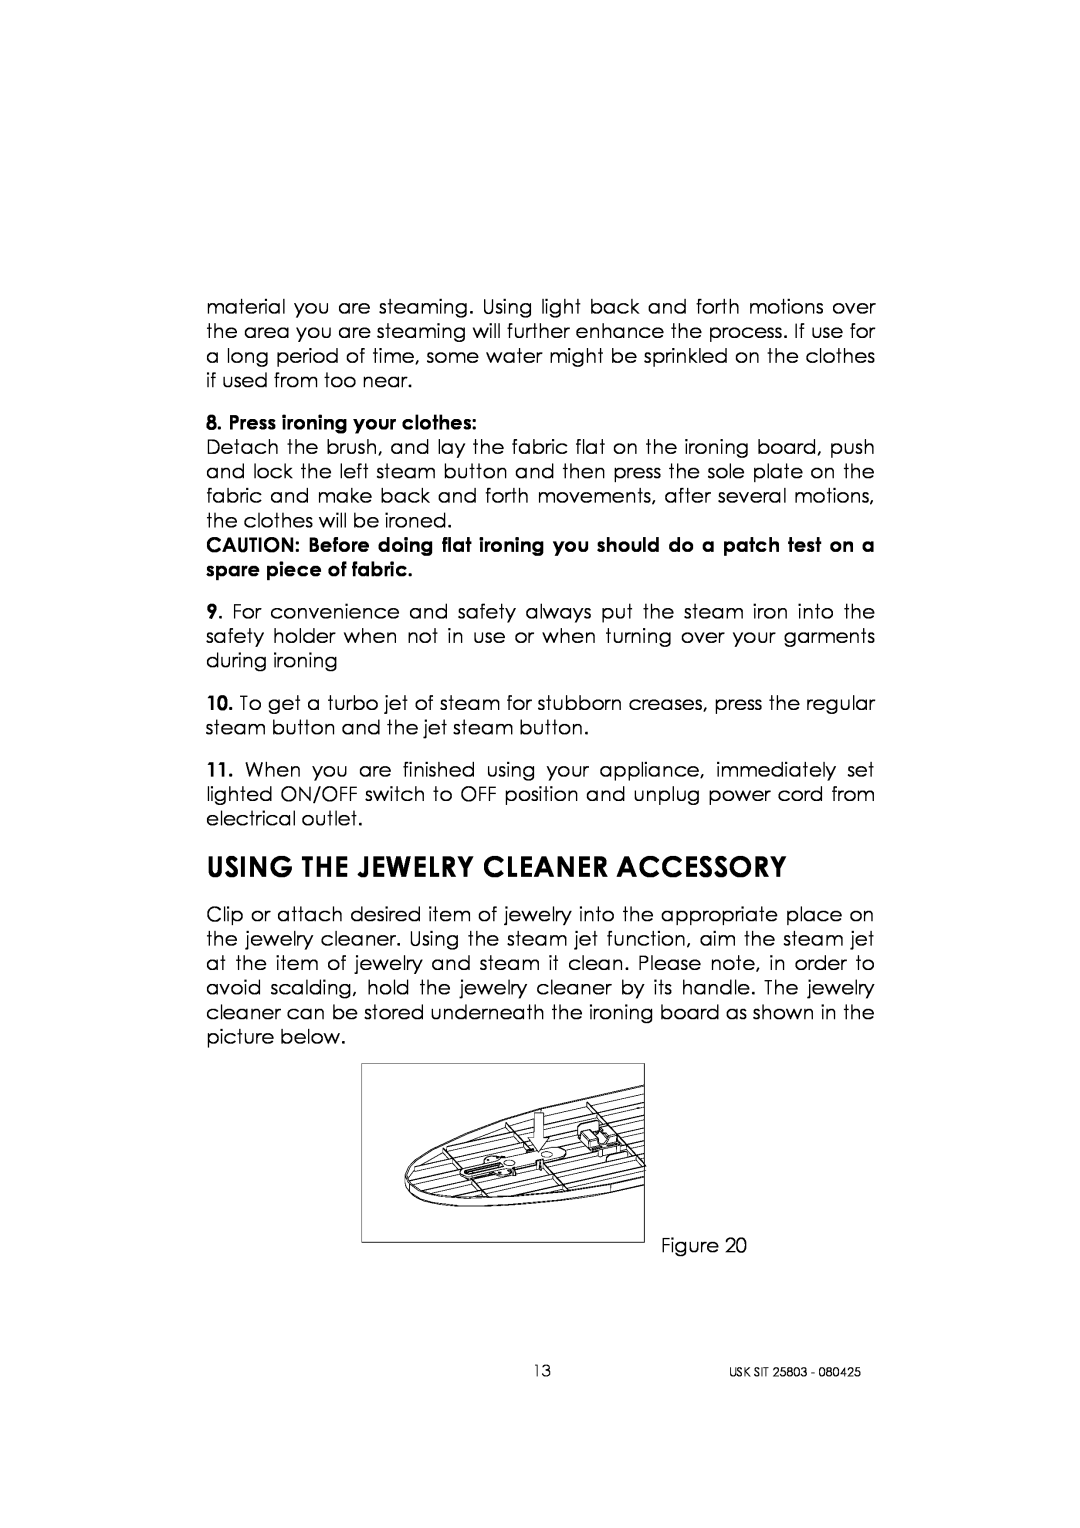 Kalorik USK SIT 25803 manual Using The Jewelry Cleaner Accessory 